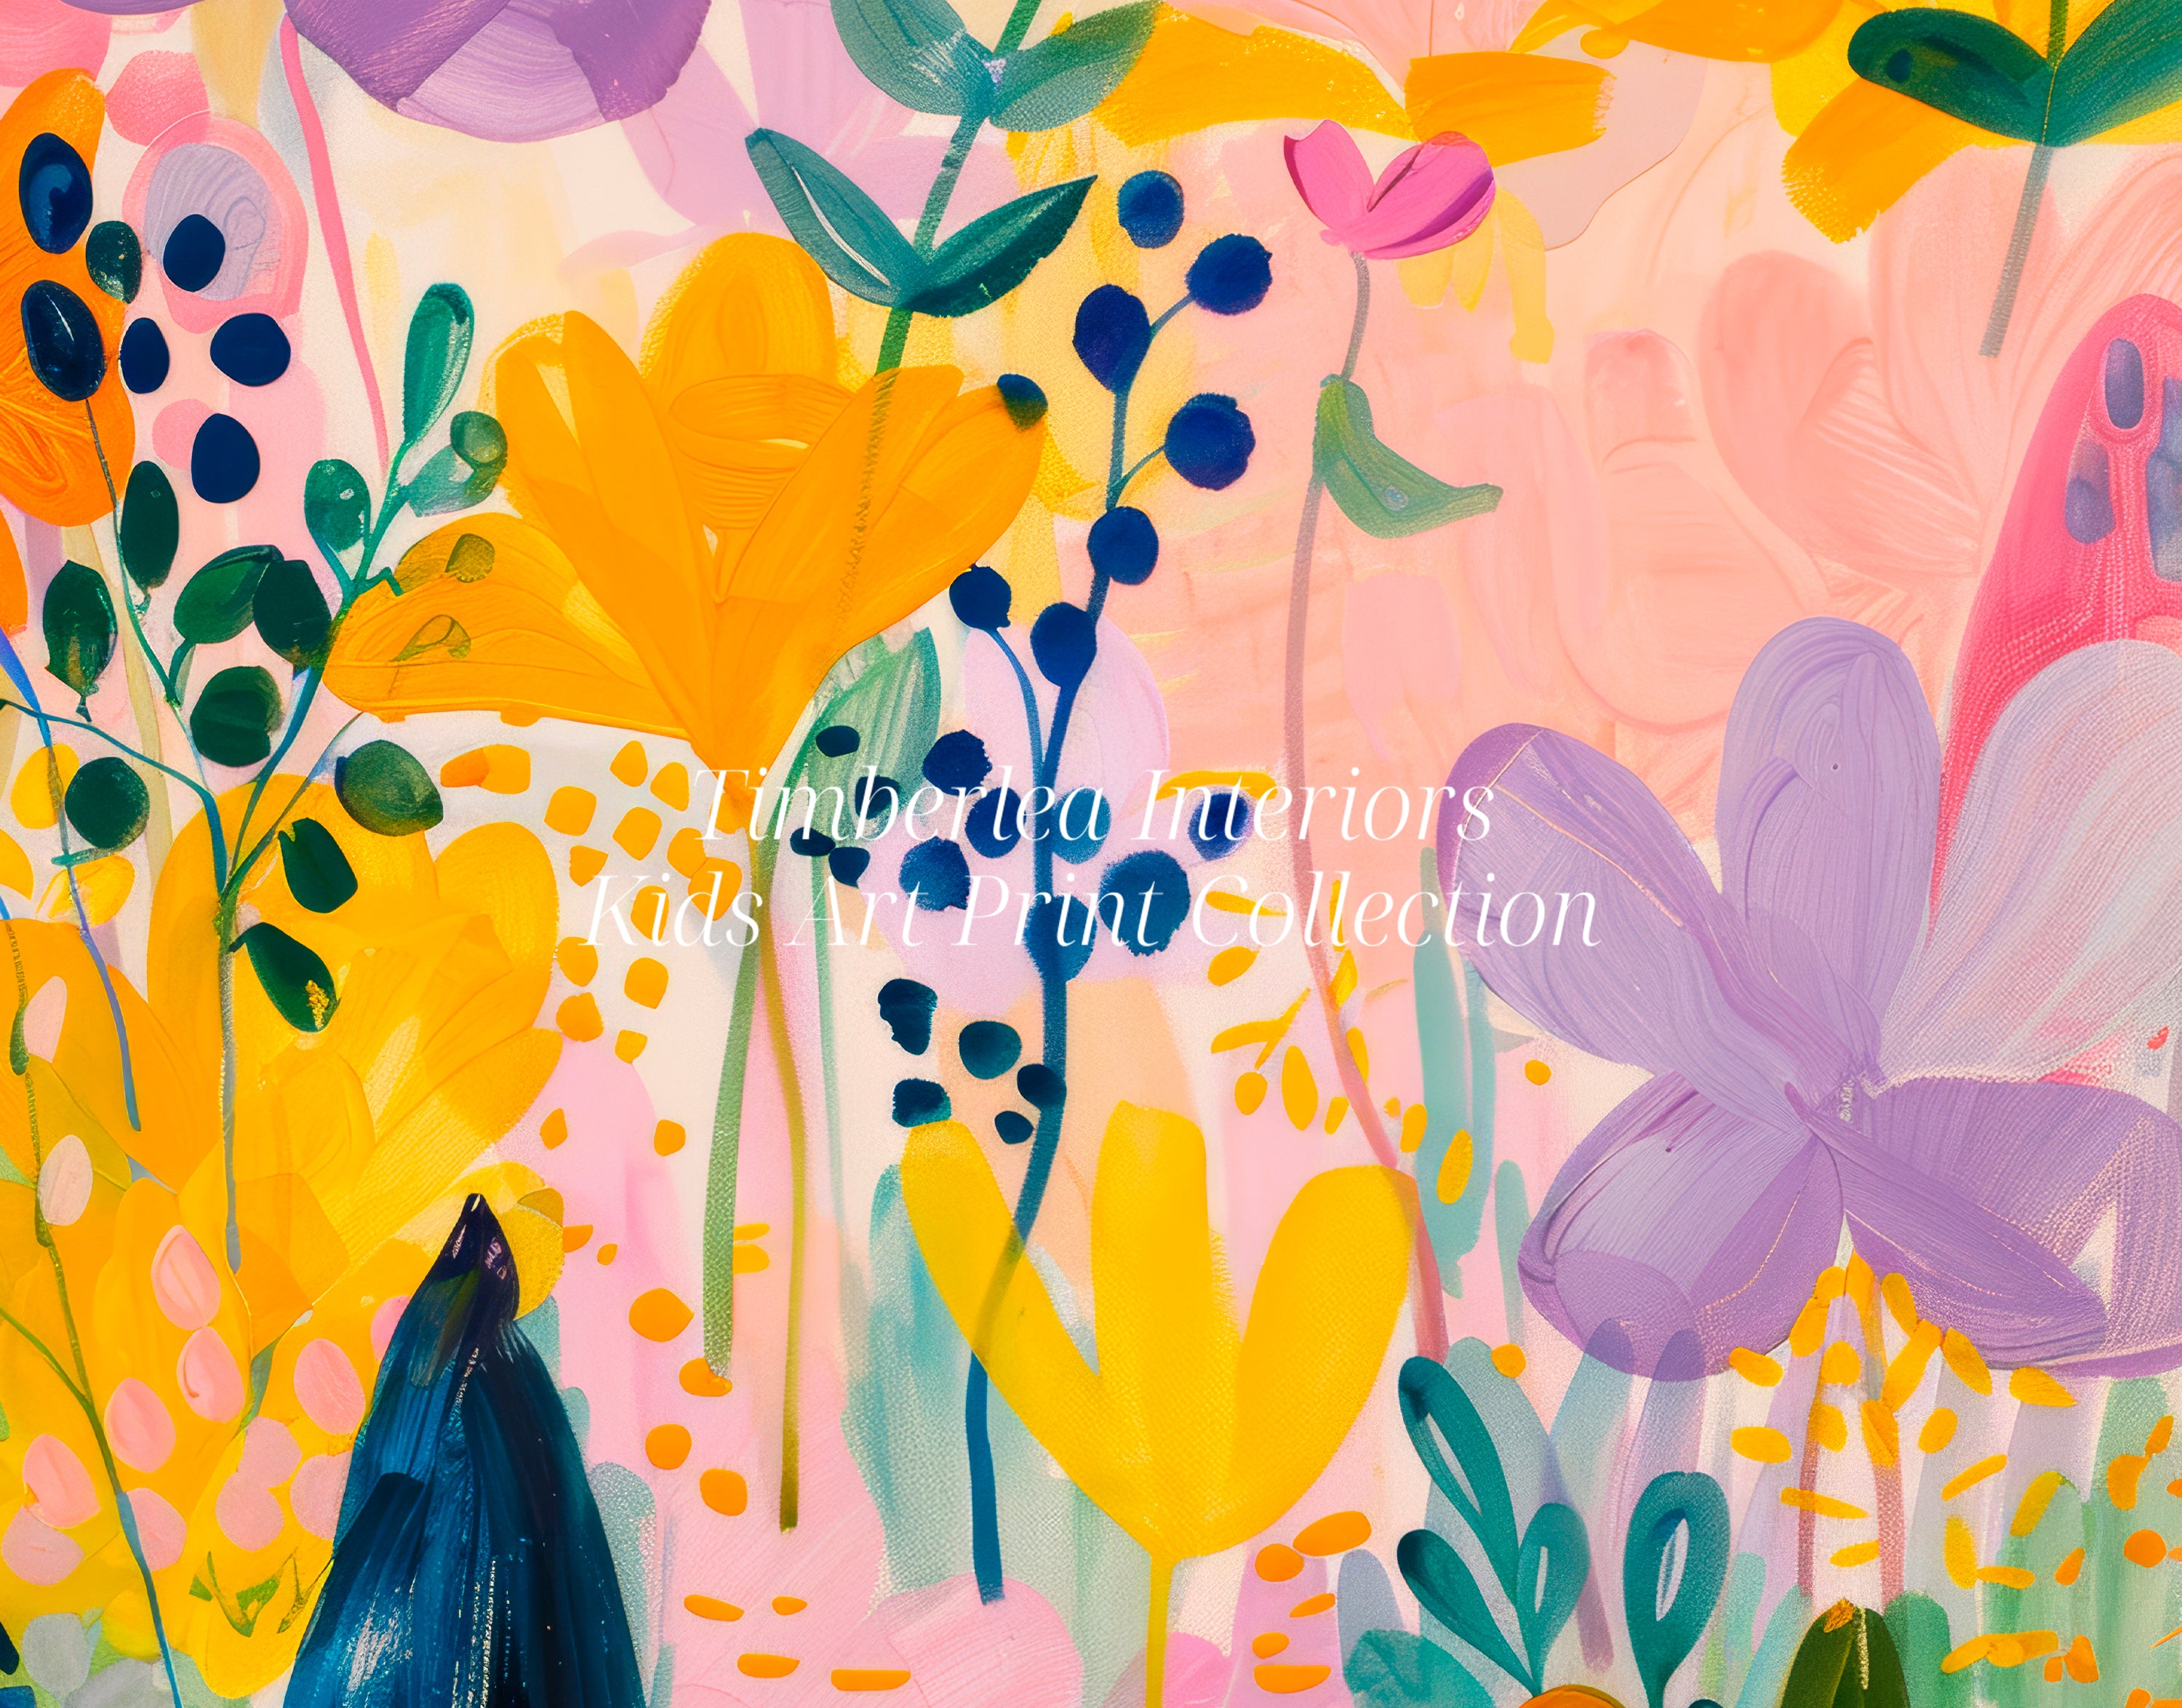 Close-up view of the Floral Fantasy Art Print showcasing a vibrant array of colorful flowers in shades of yellow, purple, and green against a soft pink background.